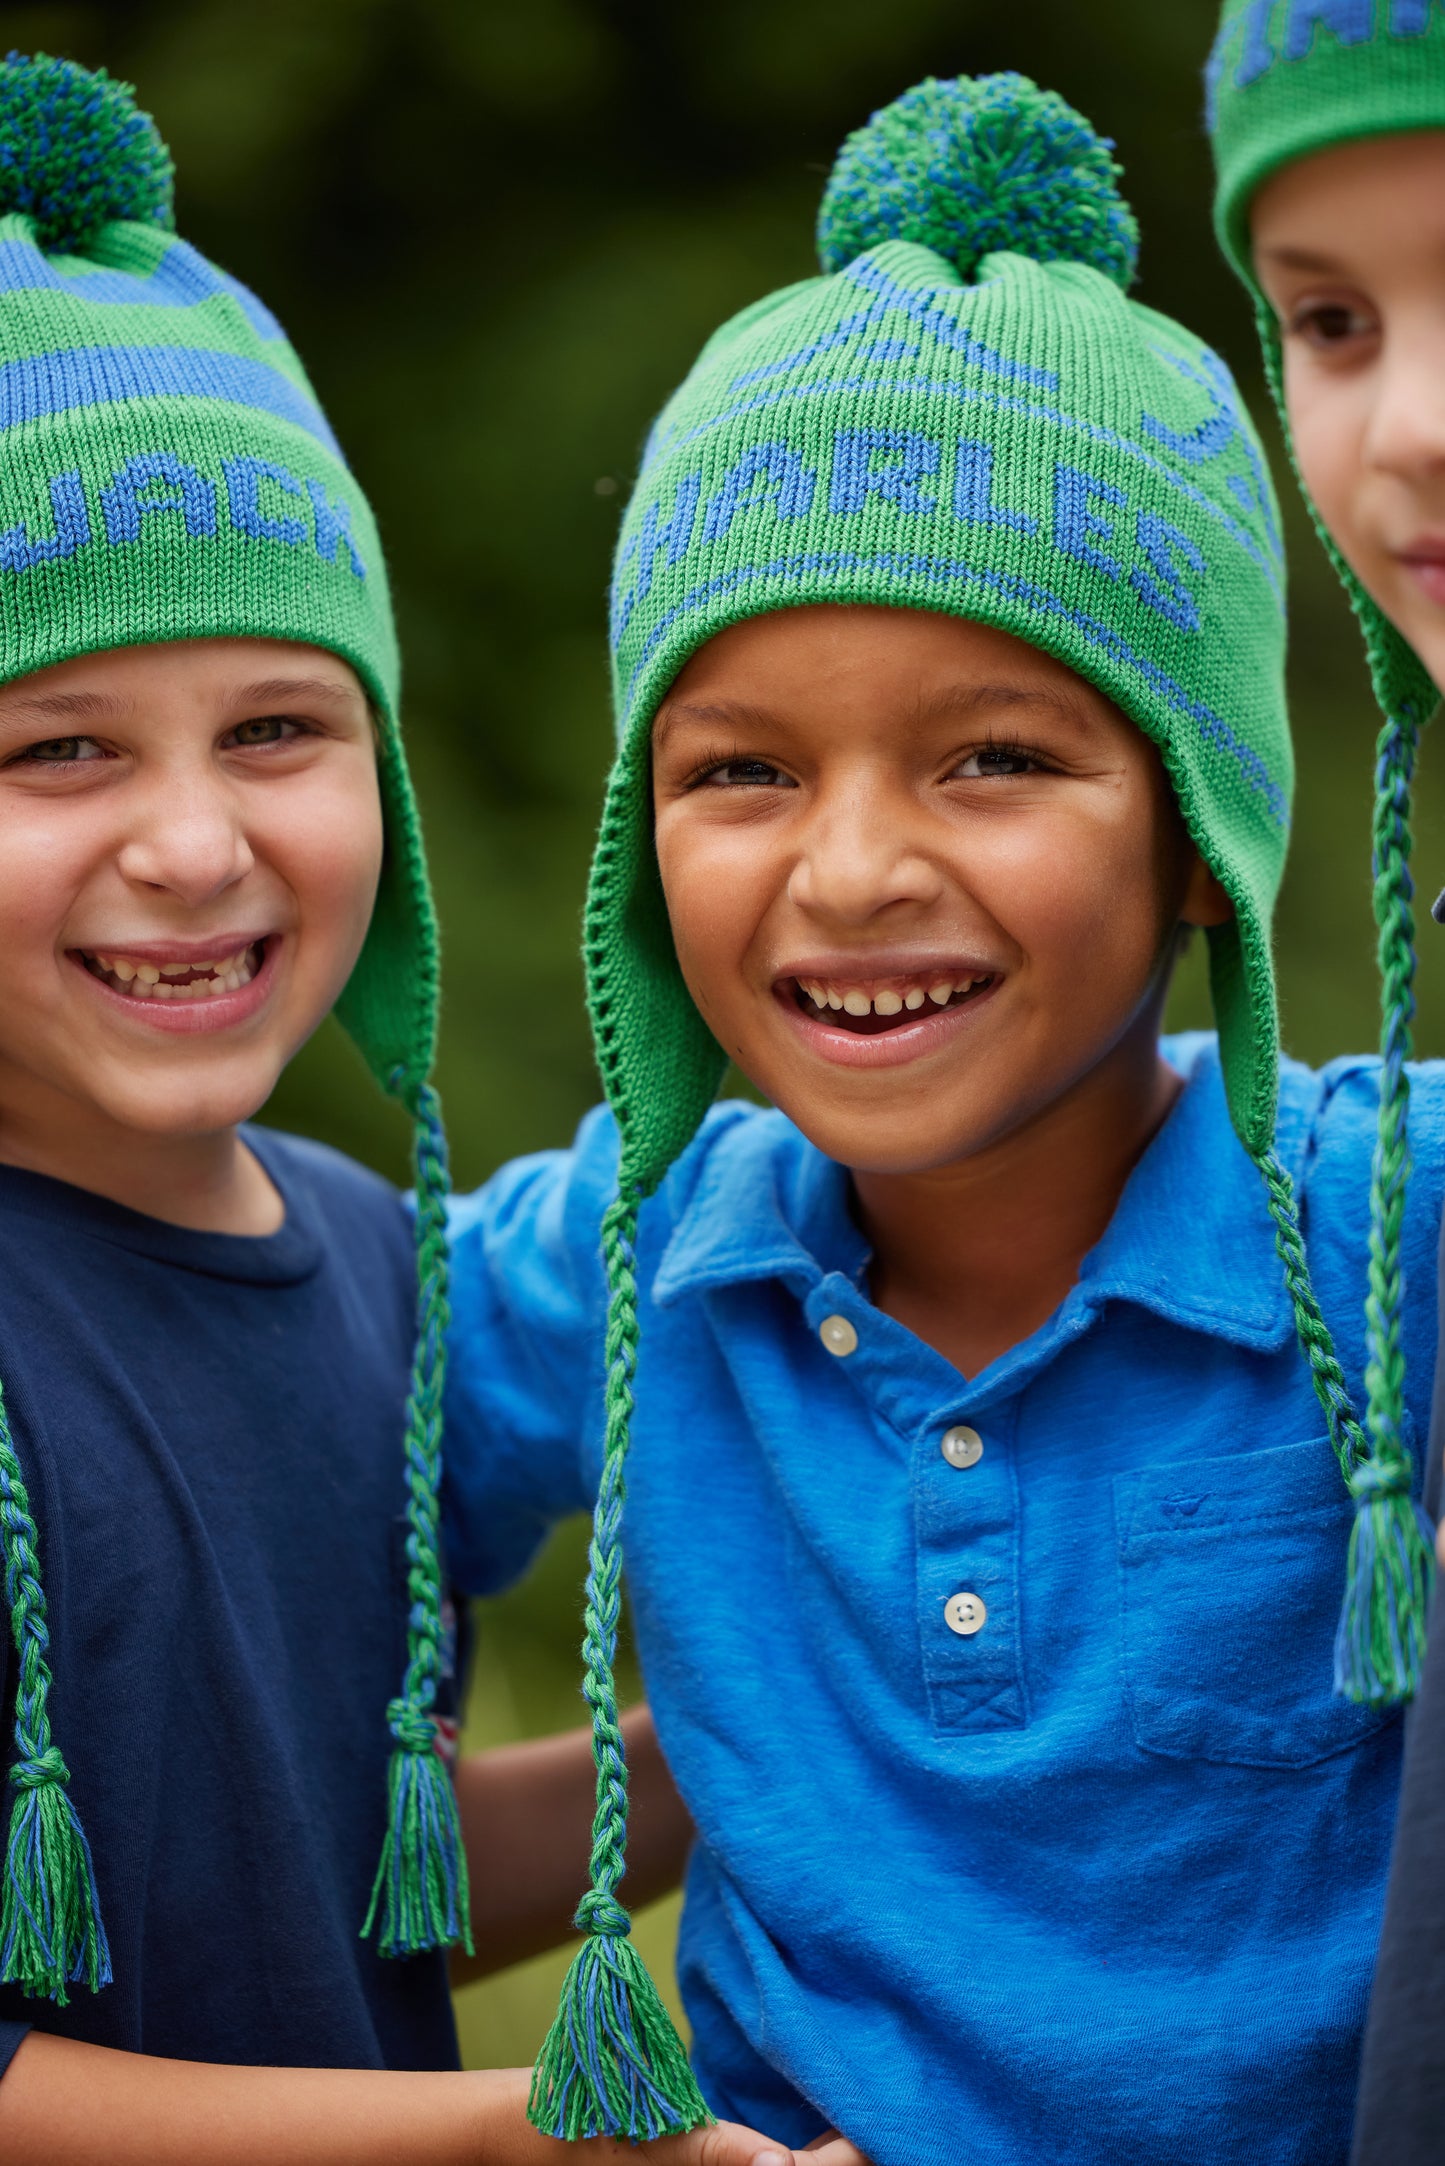 CHILDREN'S PERSONALIZED KNIT HAT